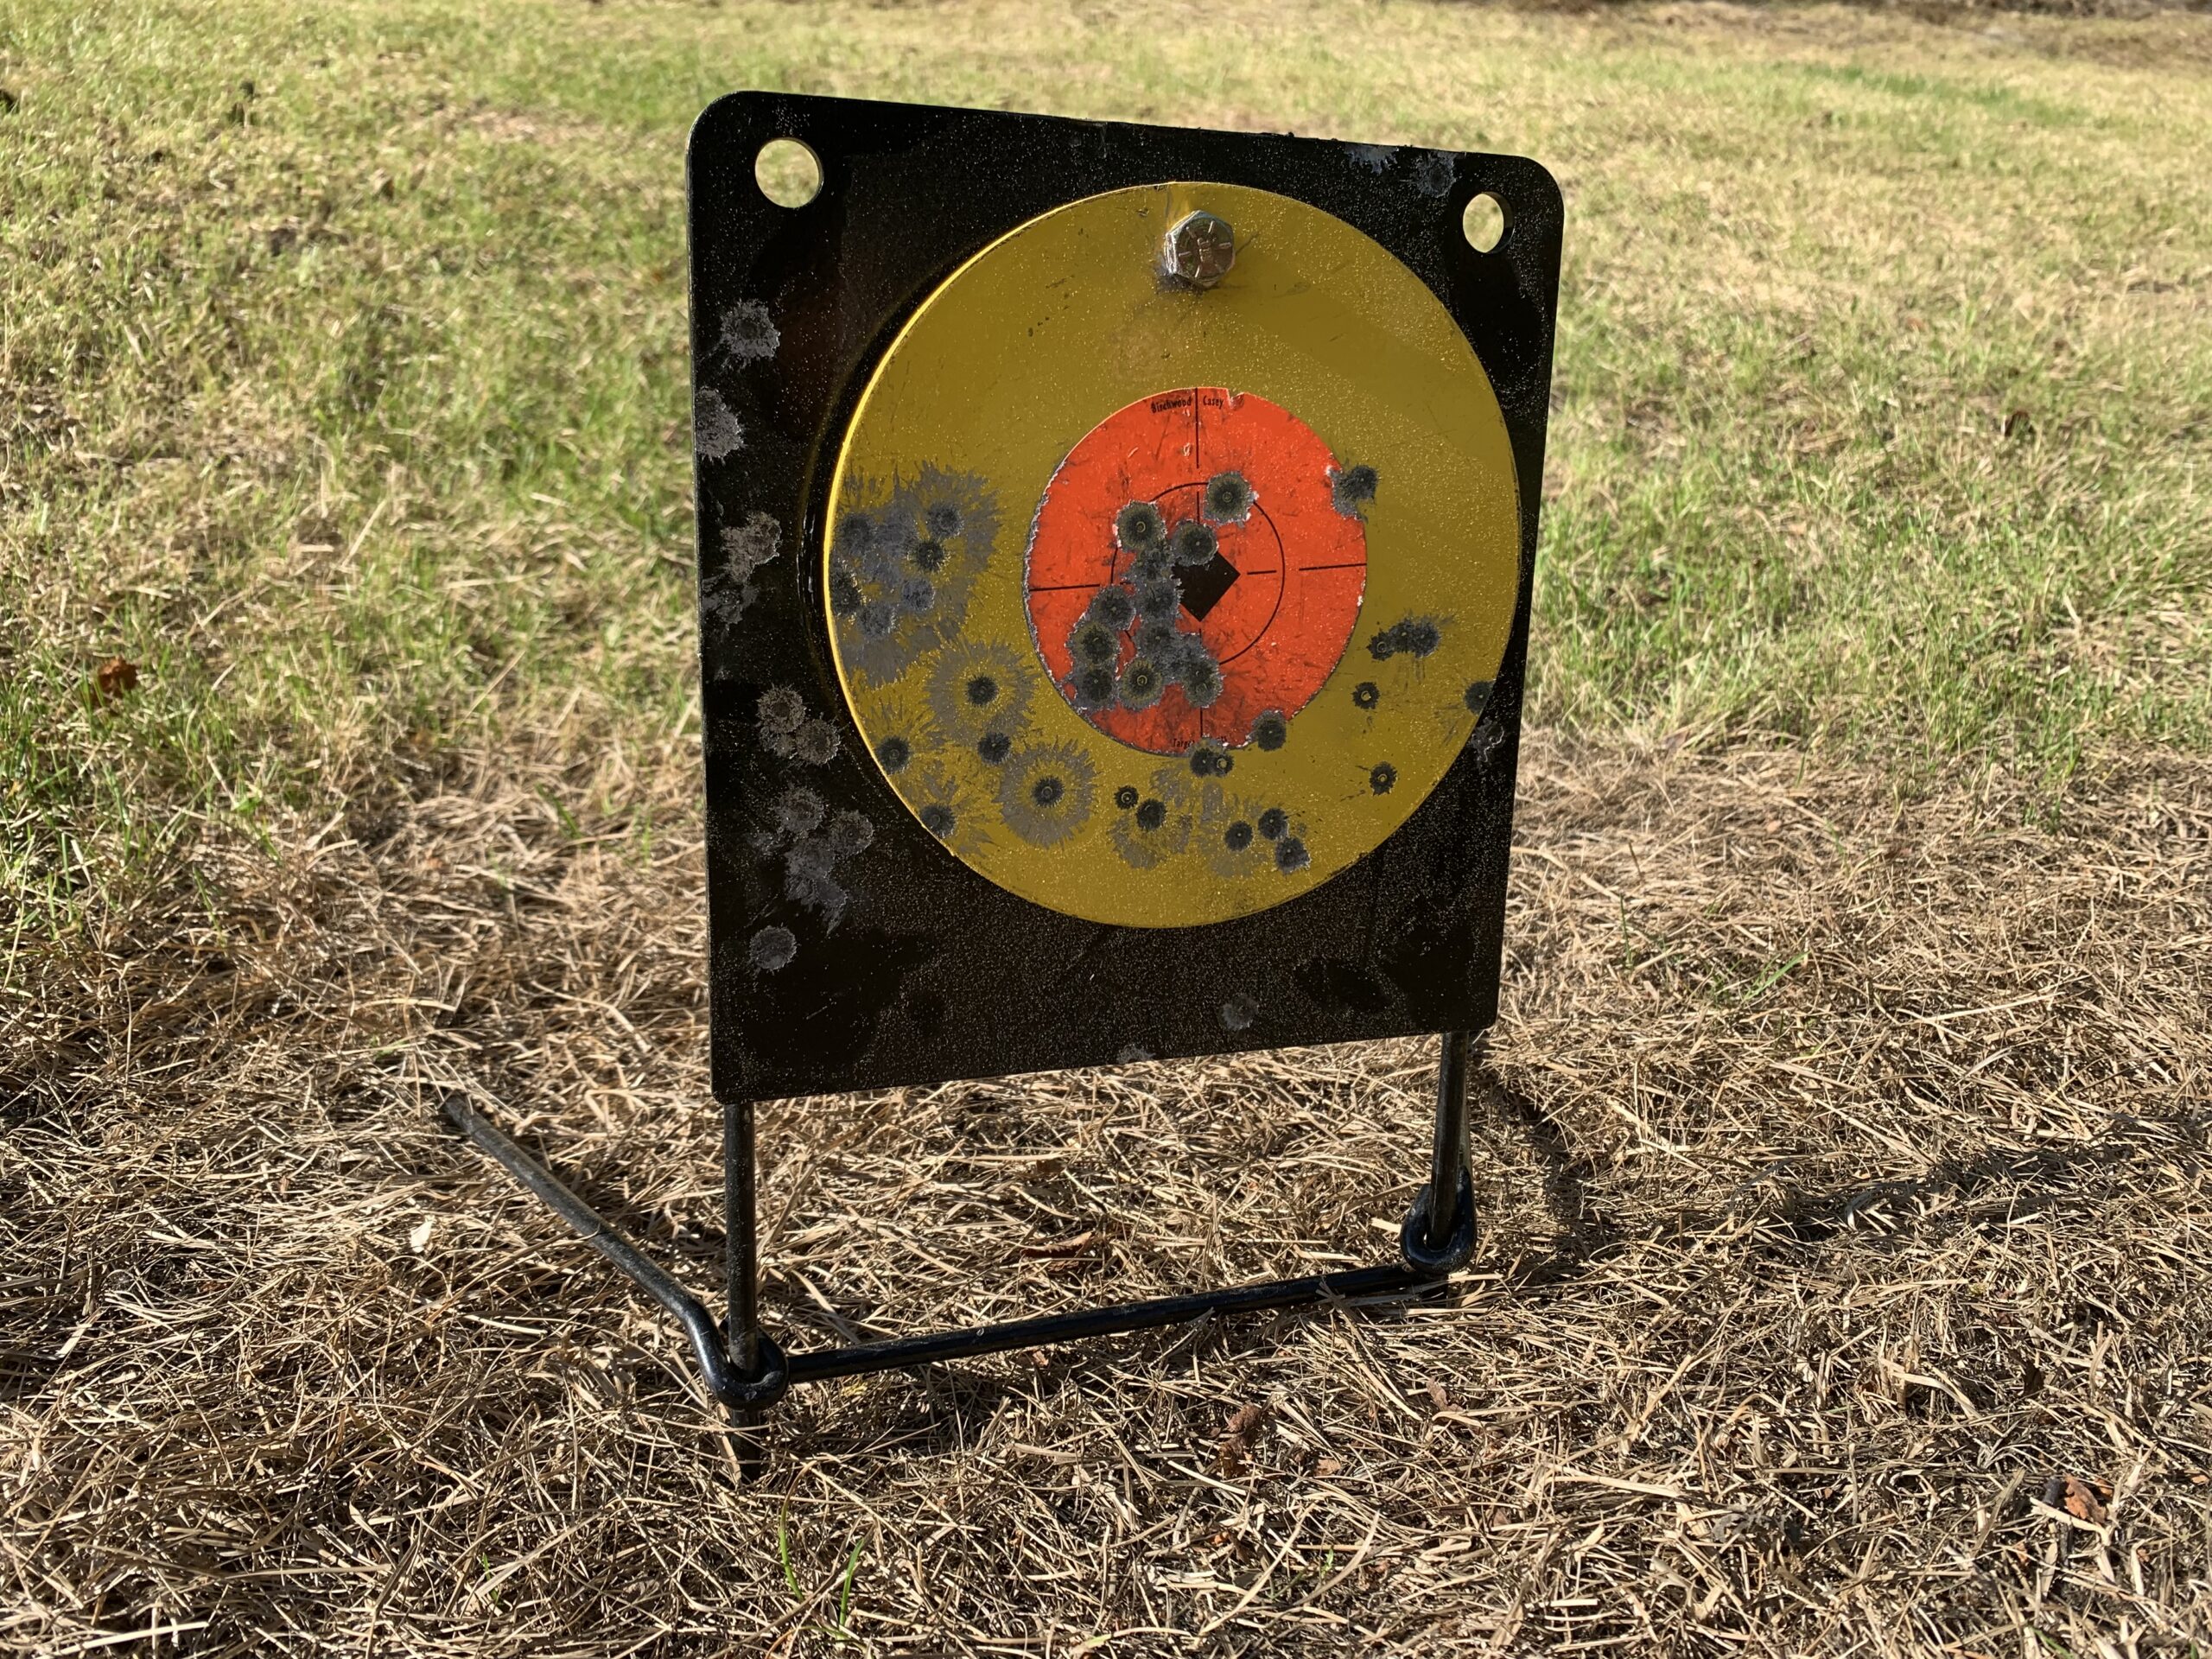 Reactive targets are a lot of fun with rimfires